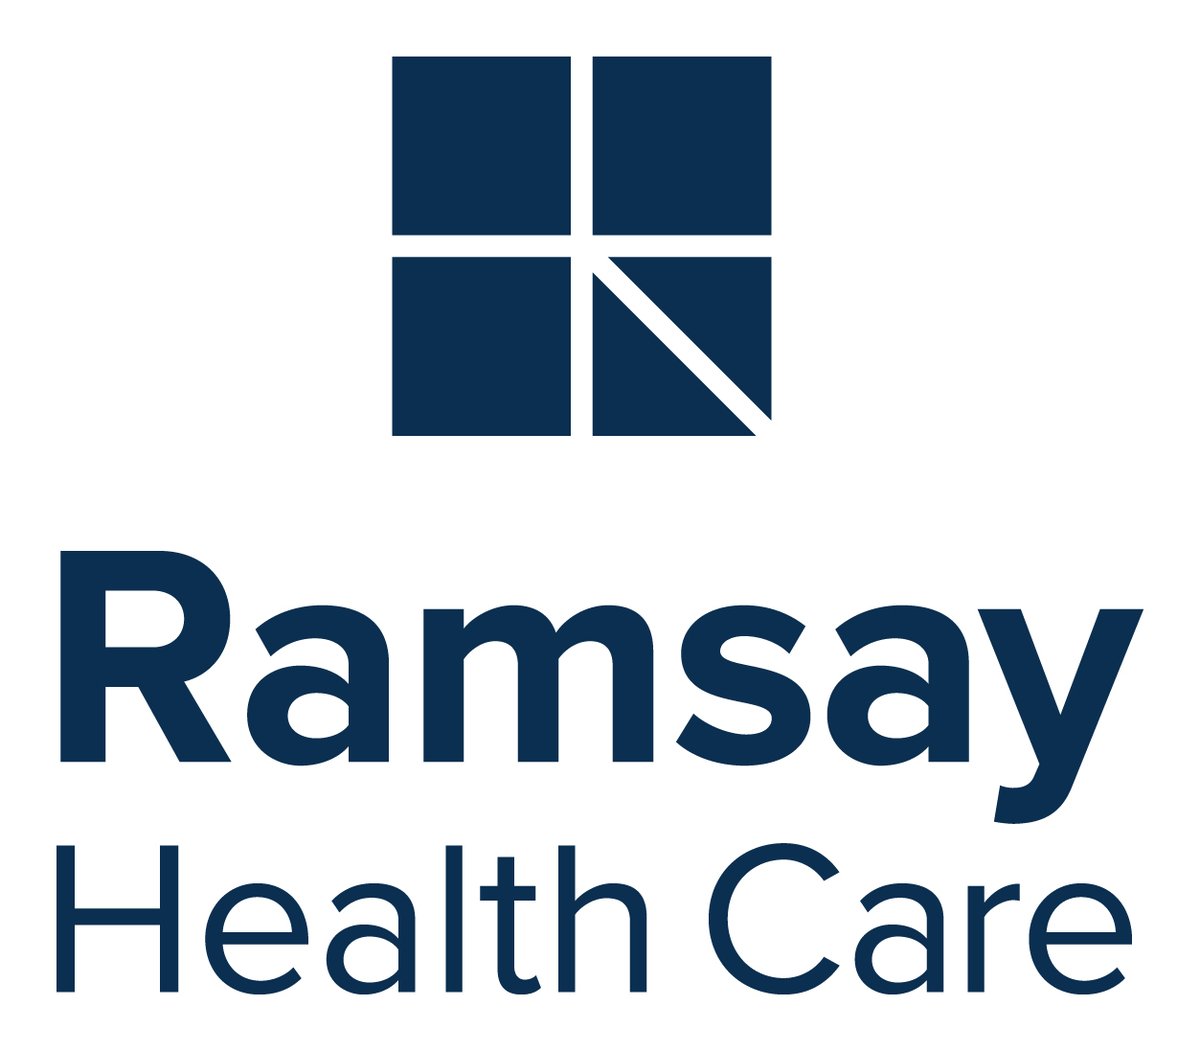 We are pleased to welcome CT:IQ’s newest member, Ramsay Health Care. Ramsay is one of the largest and most diverse private healthcare companies in the world, treating millions of people every year. We look forward to collaborating! bit.ly/3J572QH